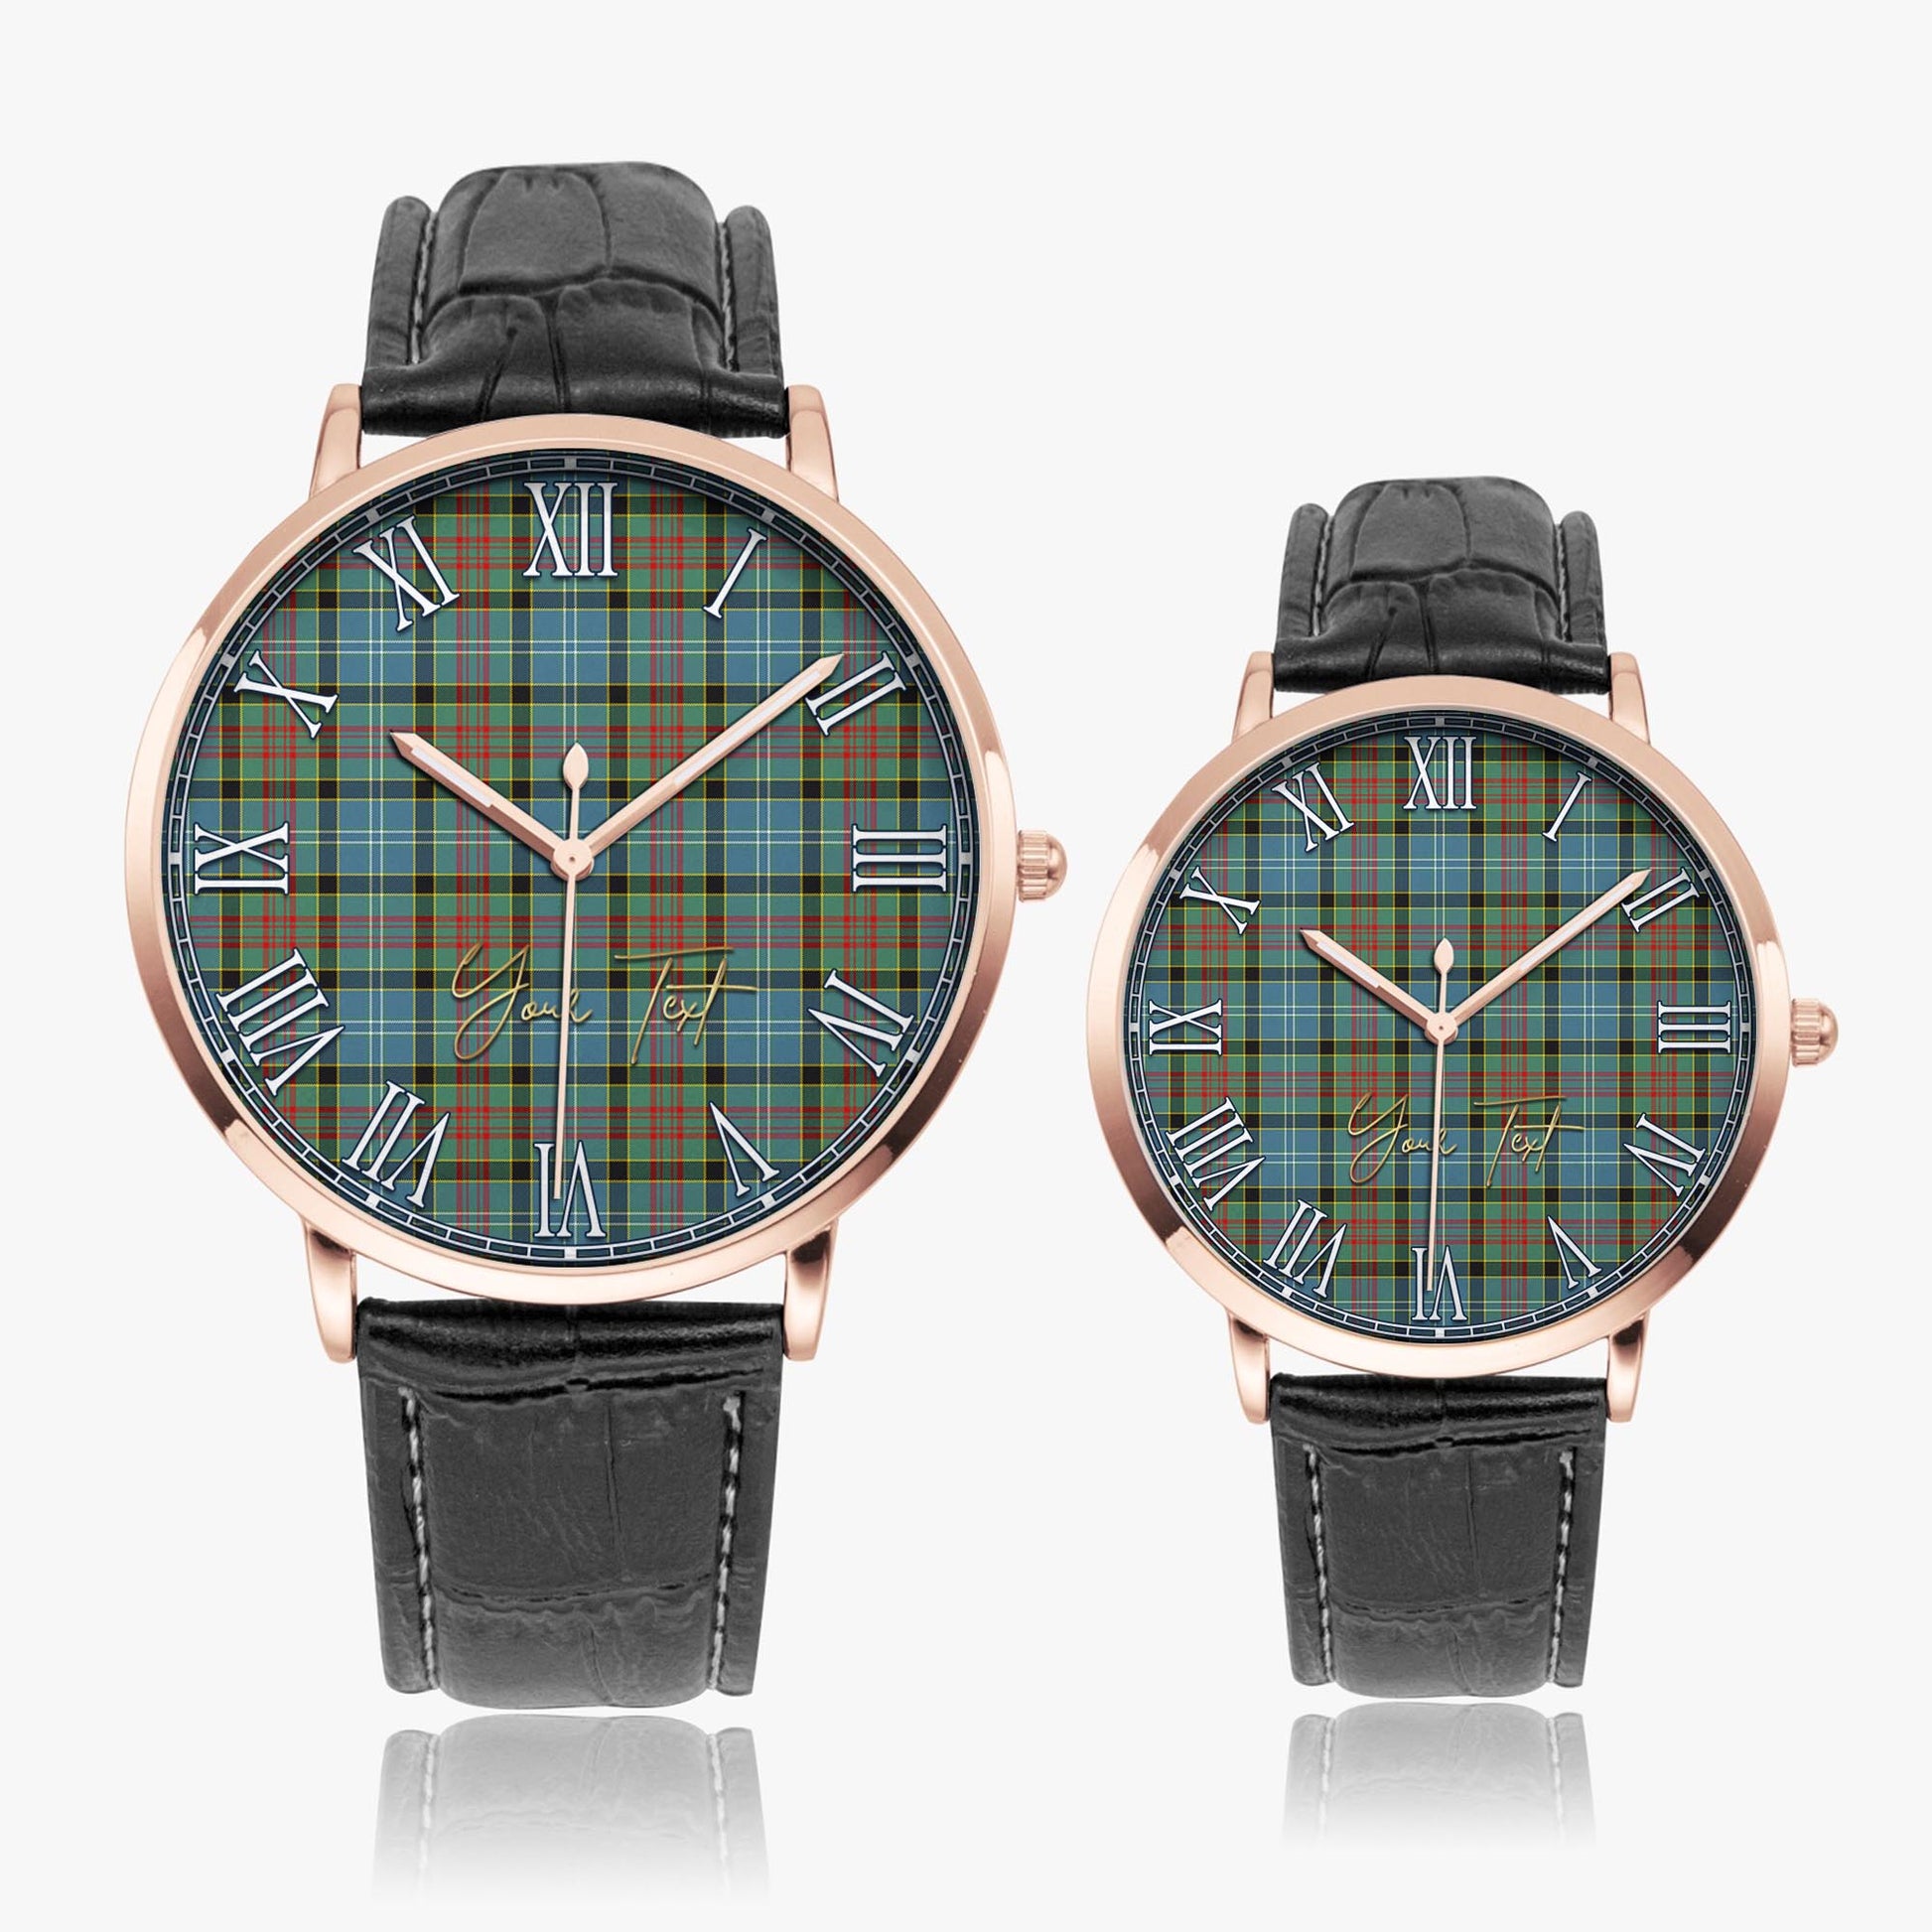 Paisley Tartan Personalized Your Text Leather Trap Quartz Watch Ultra Thin Rose Gold Case With Black Leather Strap - Tartanvibesclothing